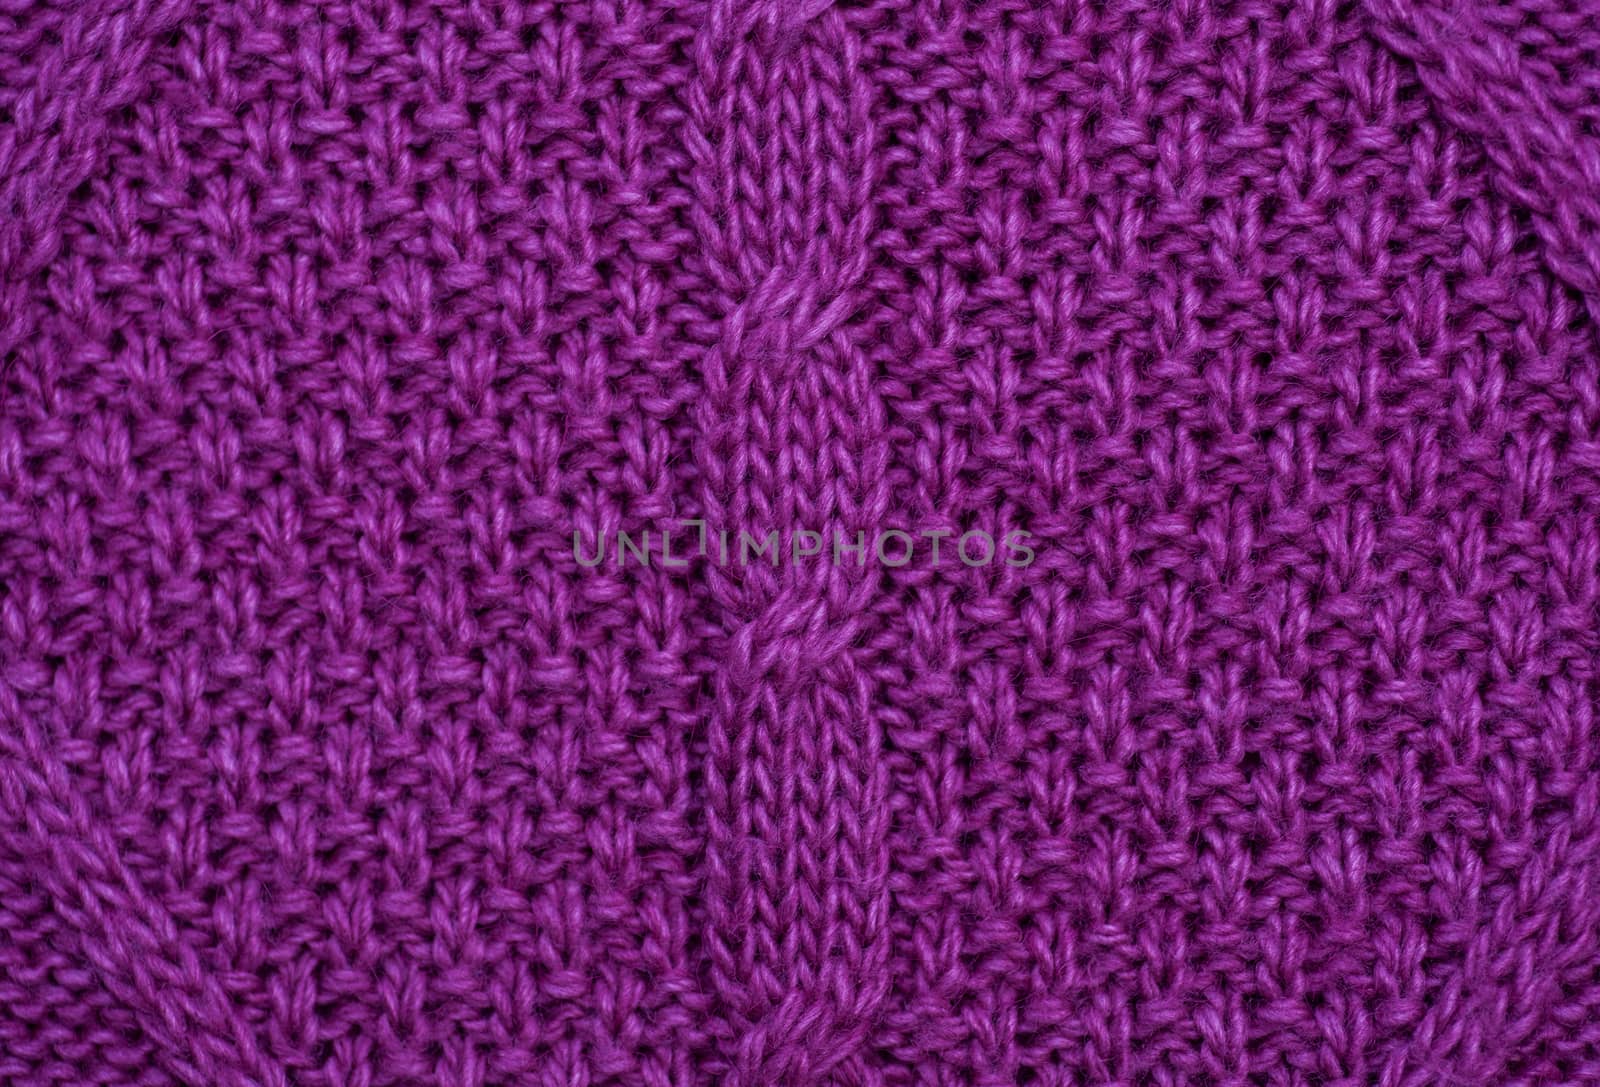 texture purple knitted fabric for the background.